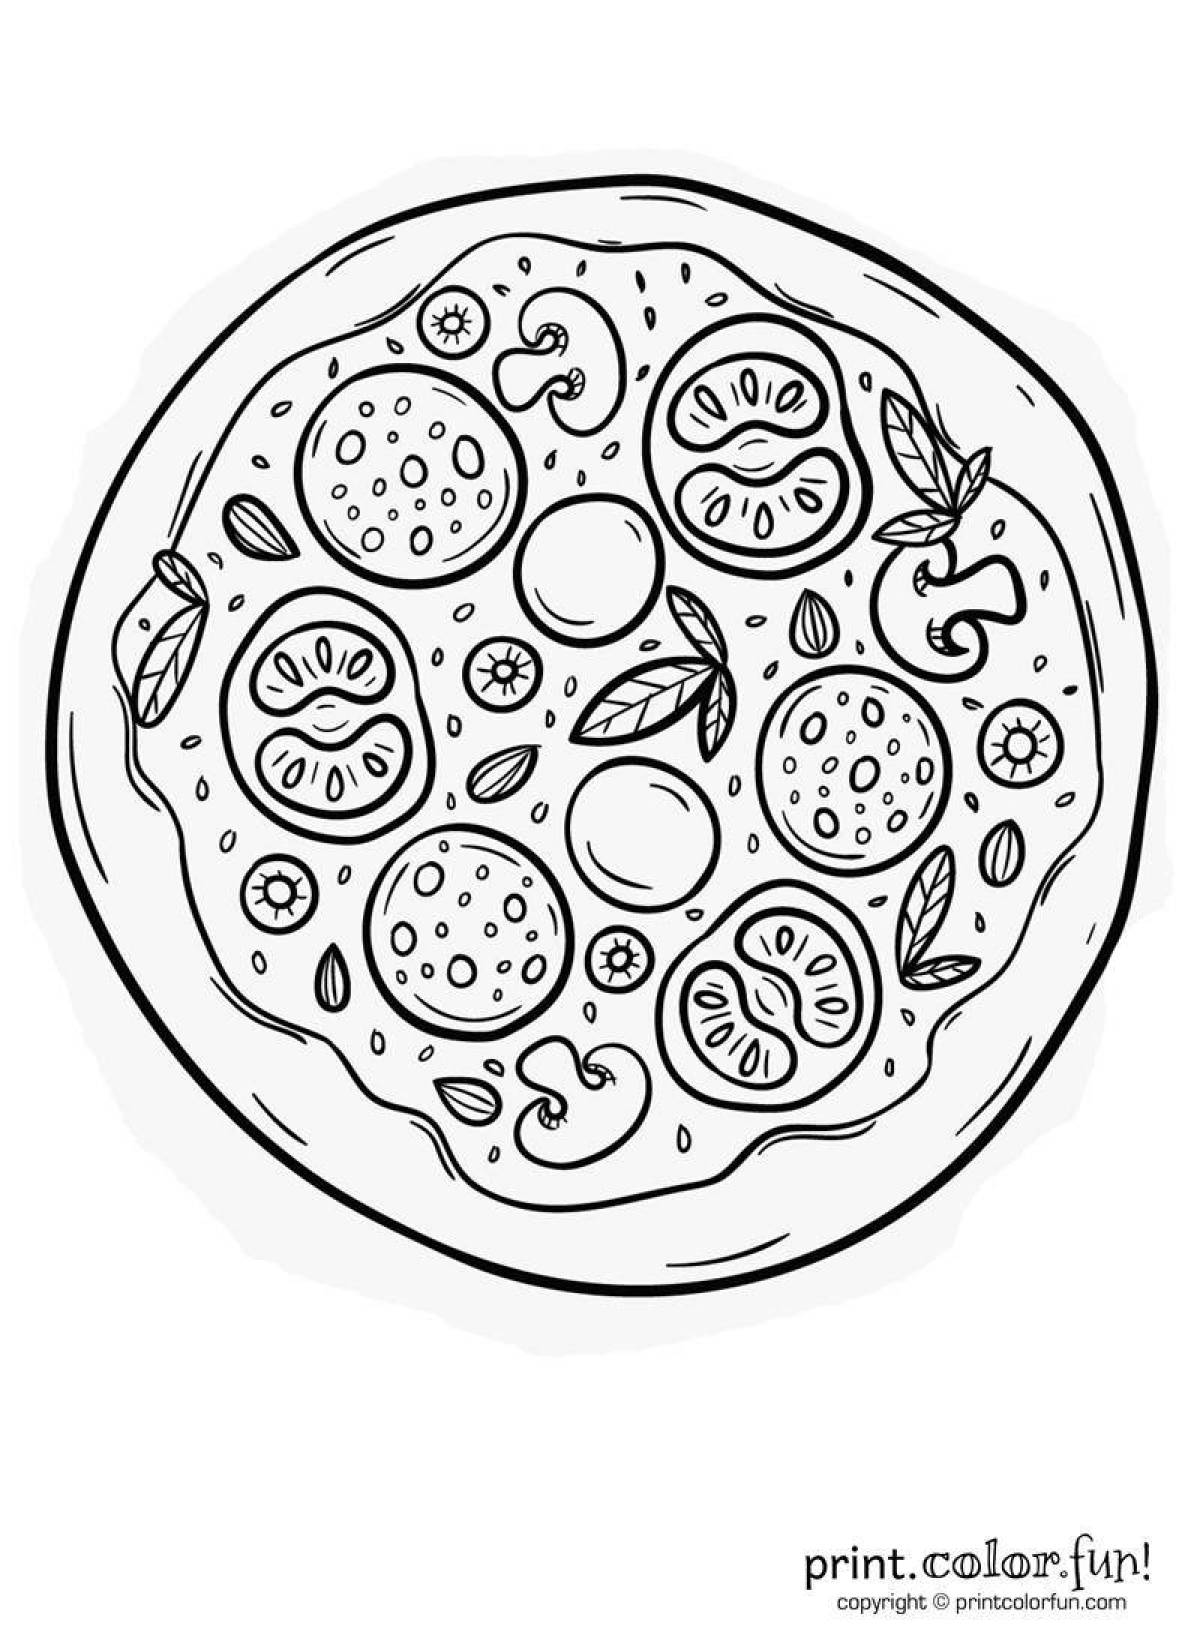 Coloring appetizing pizza